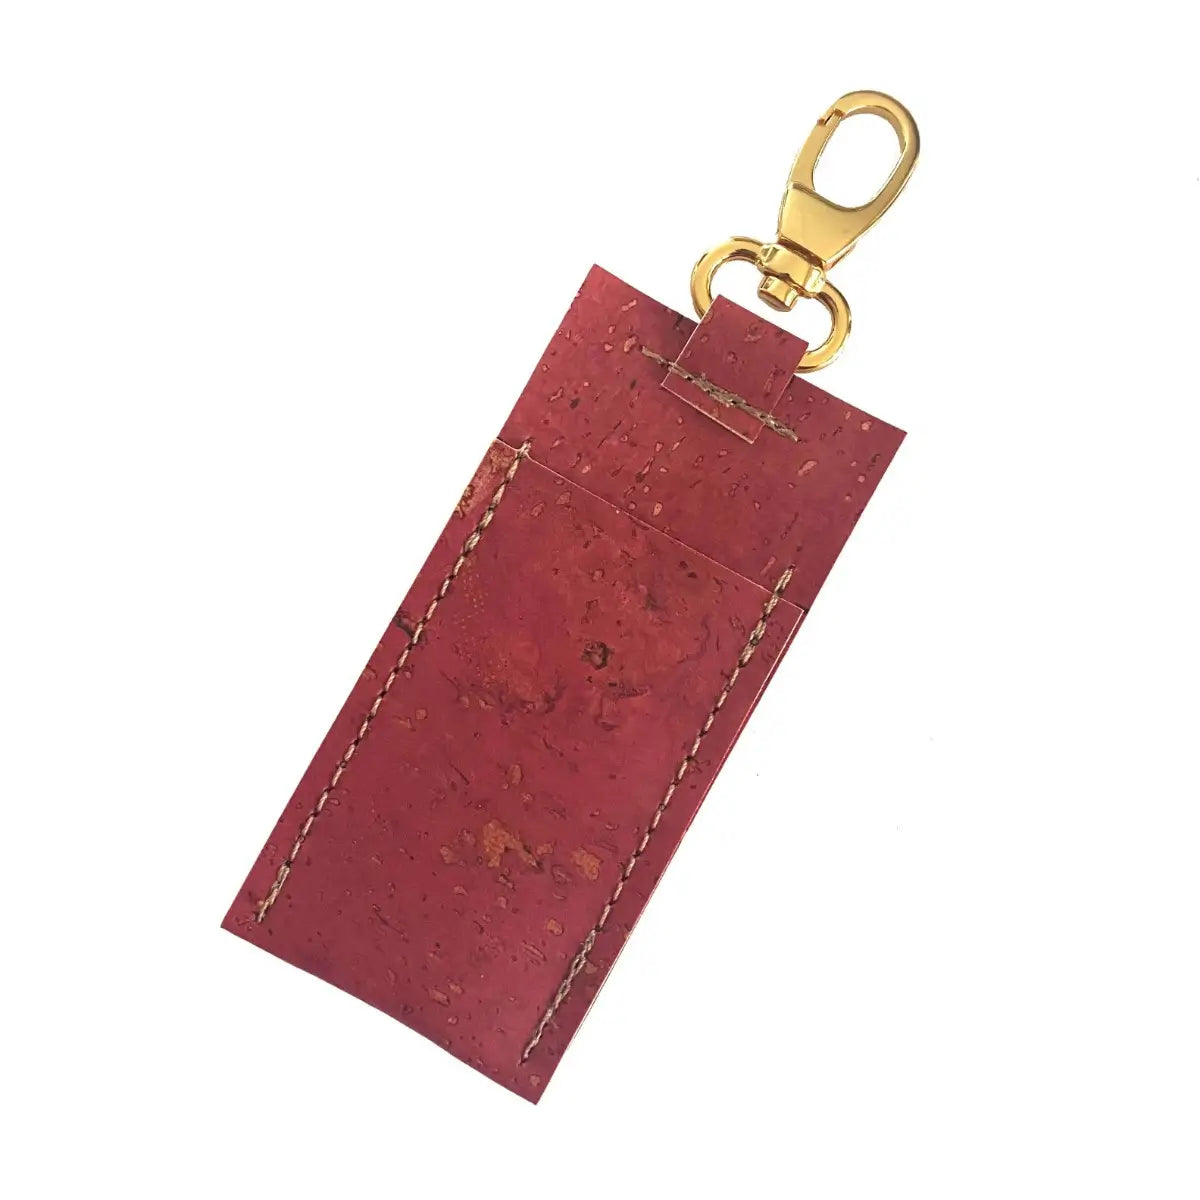 A lip balm holder in red with gold color key clip.